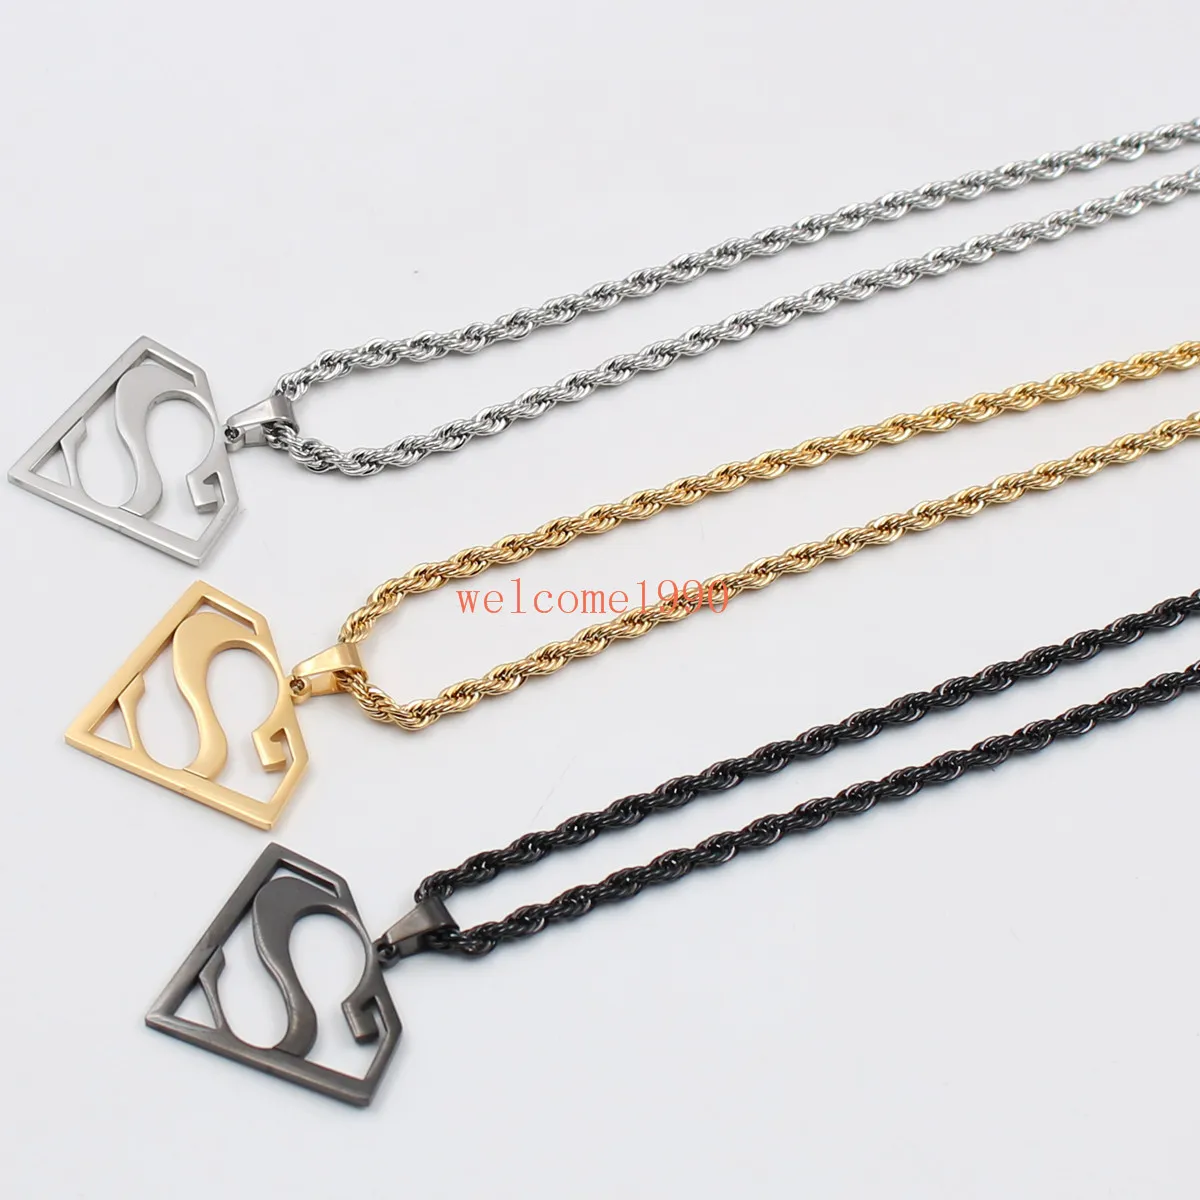 choose Gold silver black Stainless Steel 15 inch Superman logo Pendant Men039s Gifts Fashion Rope chain necklace 22 inch 4mm2943200